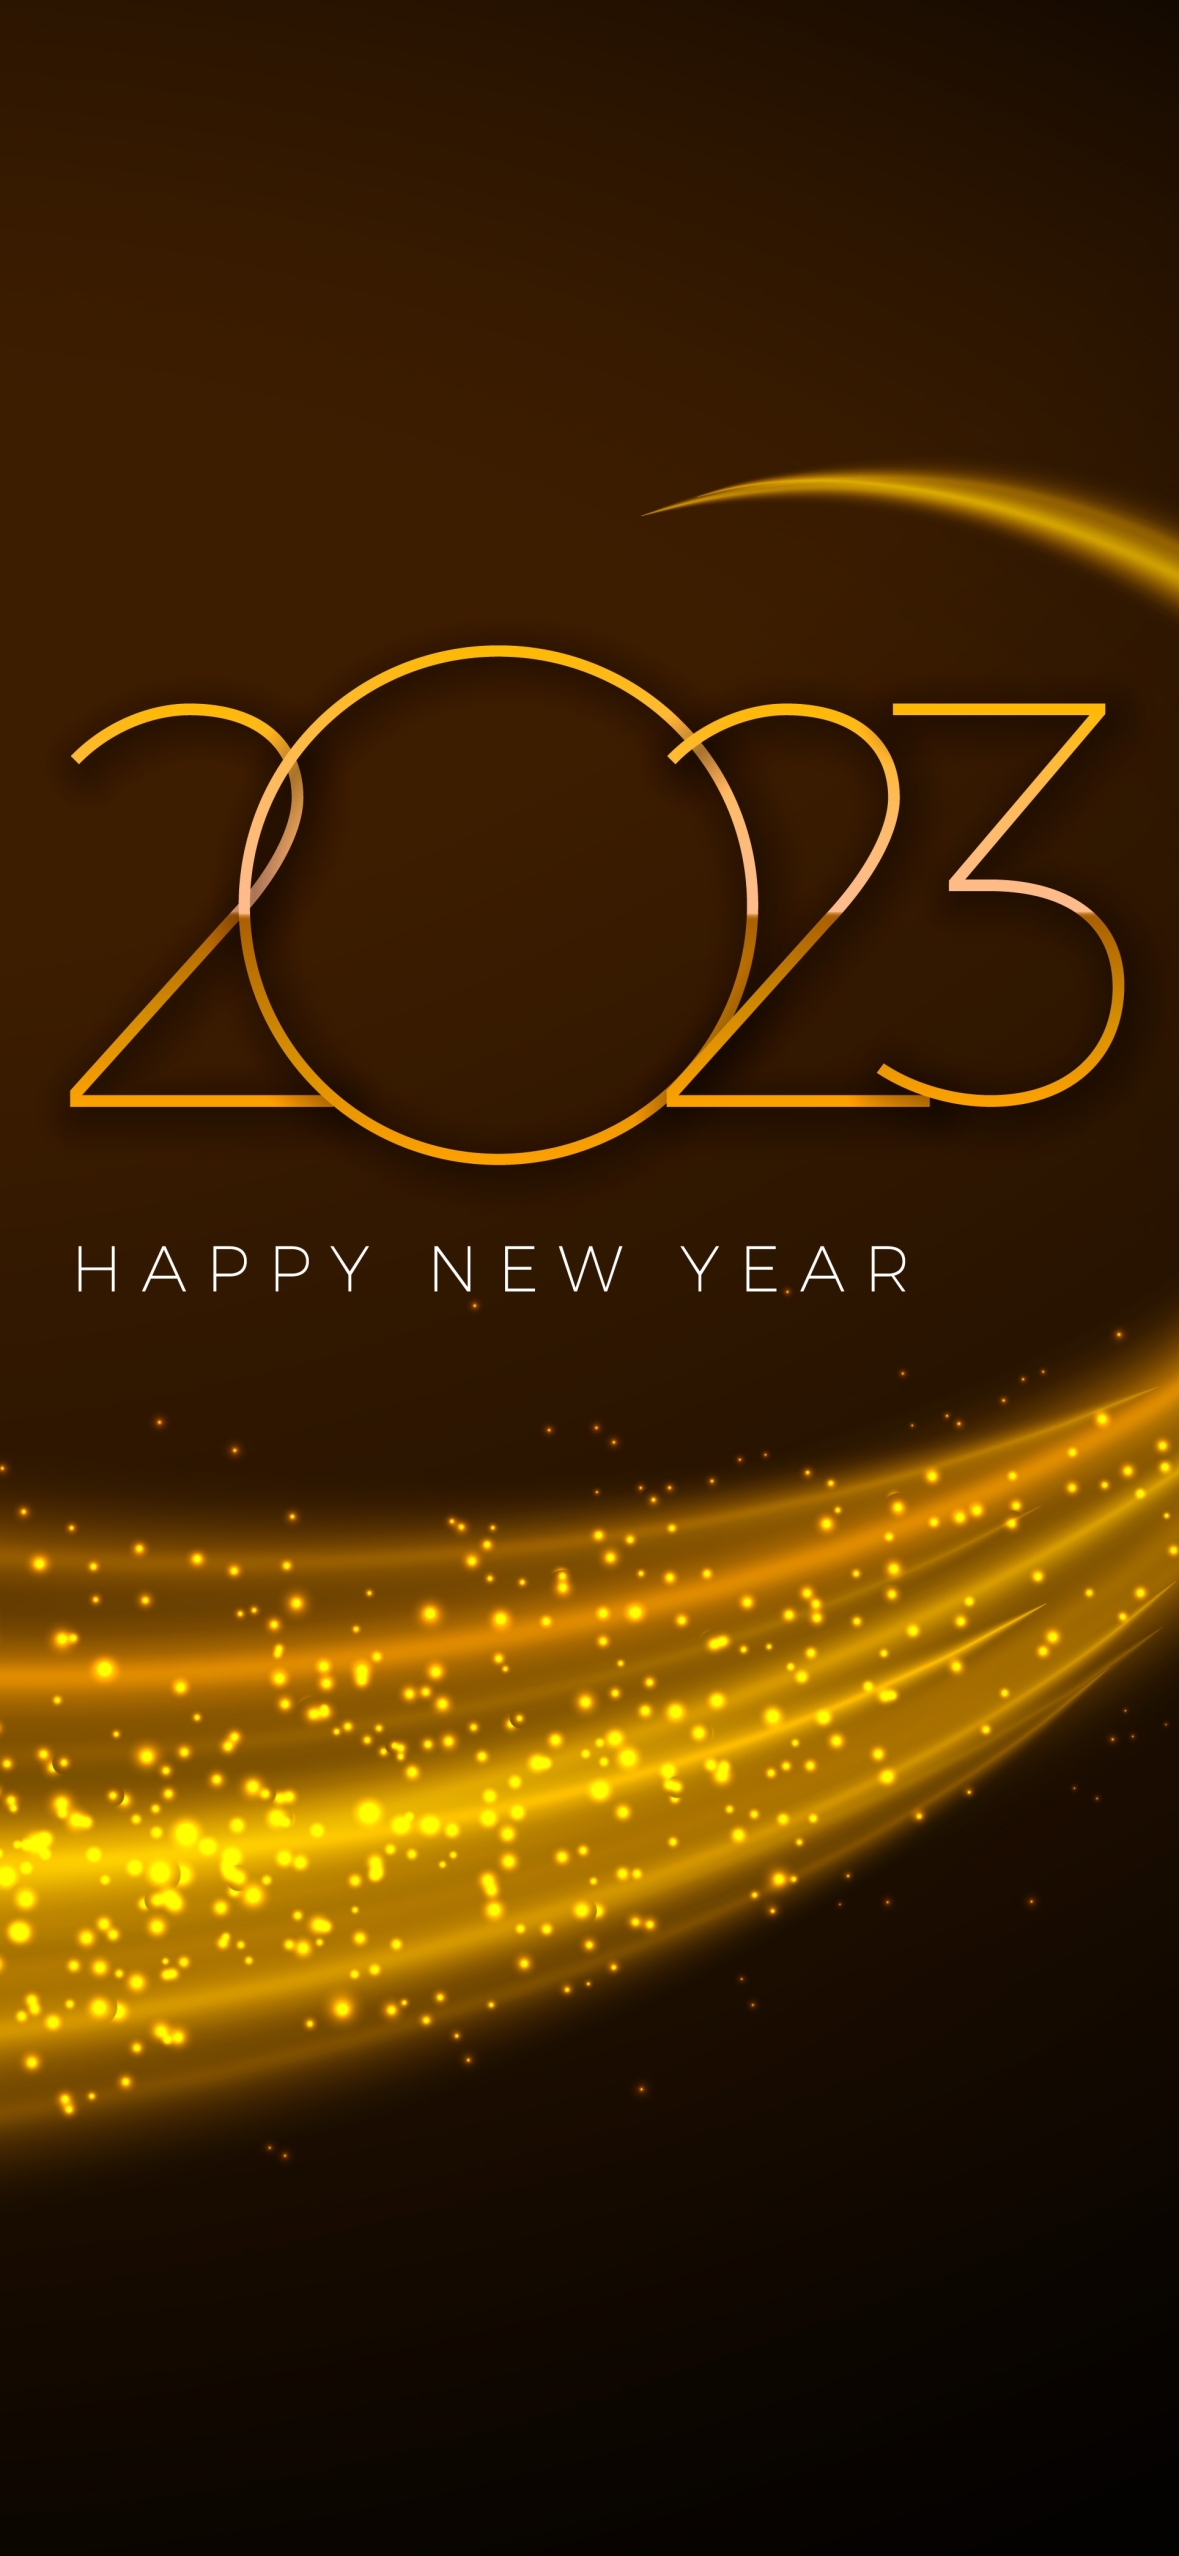 Happy New Year 2023 HD Wallpapers 1000 Free Happy New Year 2023 Wallpaper  Images For All Devices